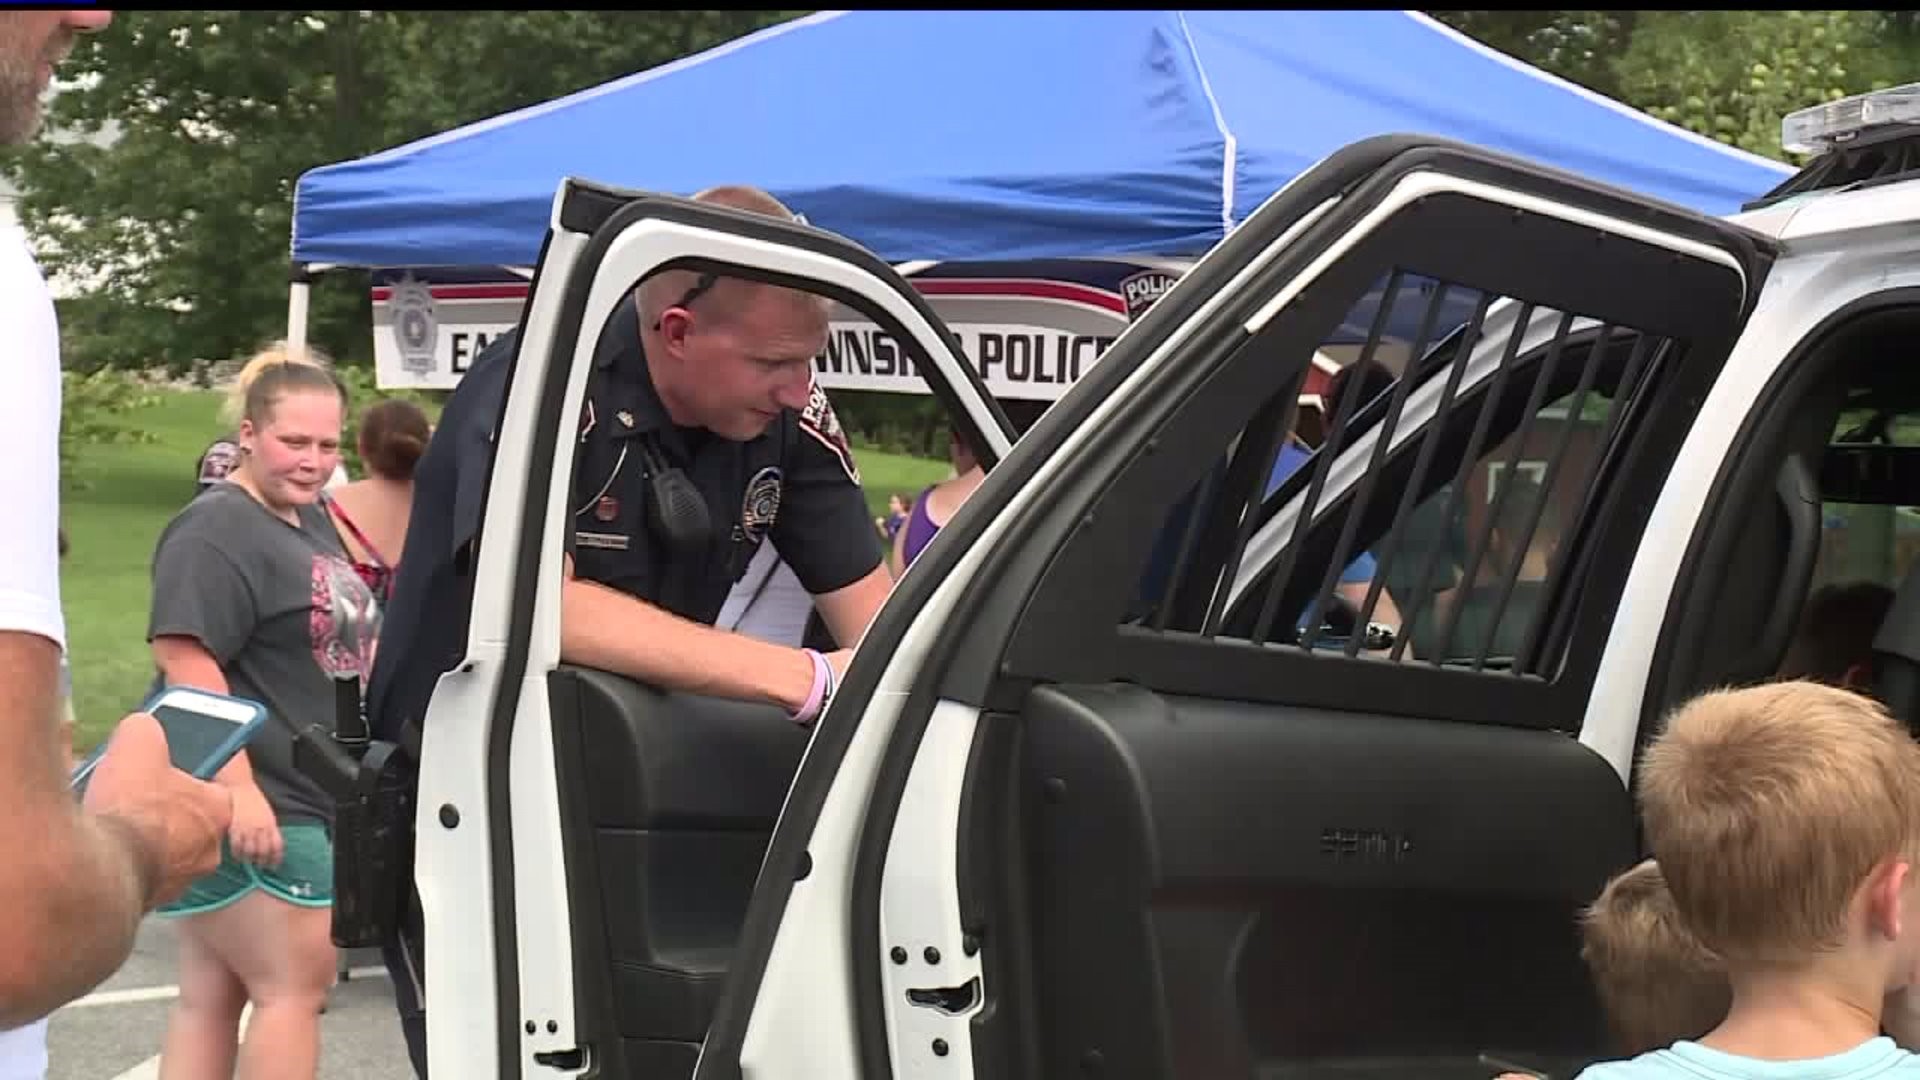 2nd Annual Pops with Cops event in Lancaster County